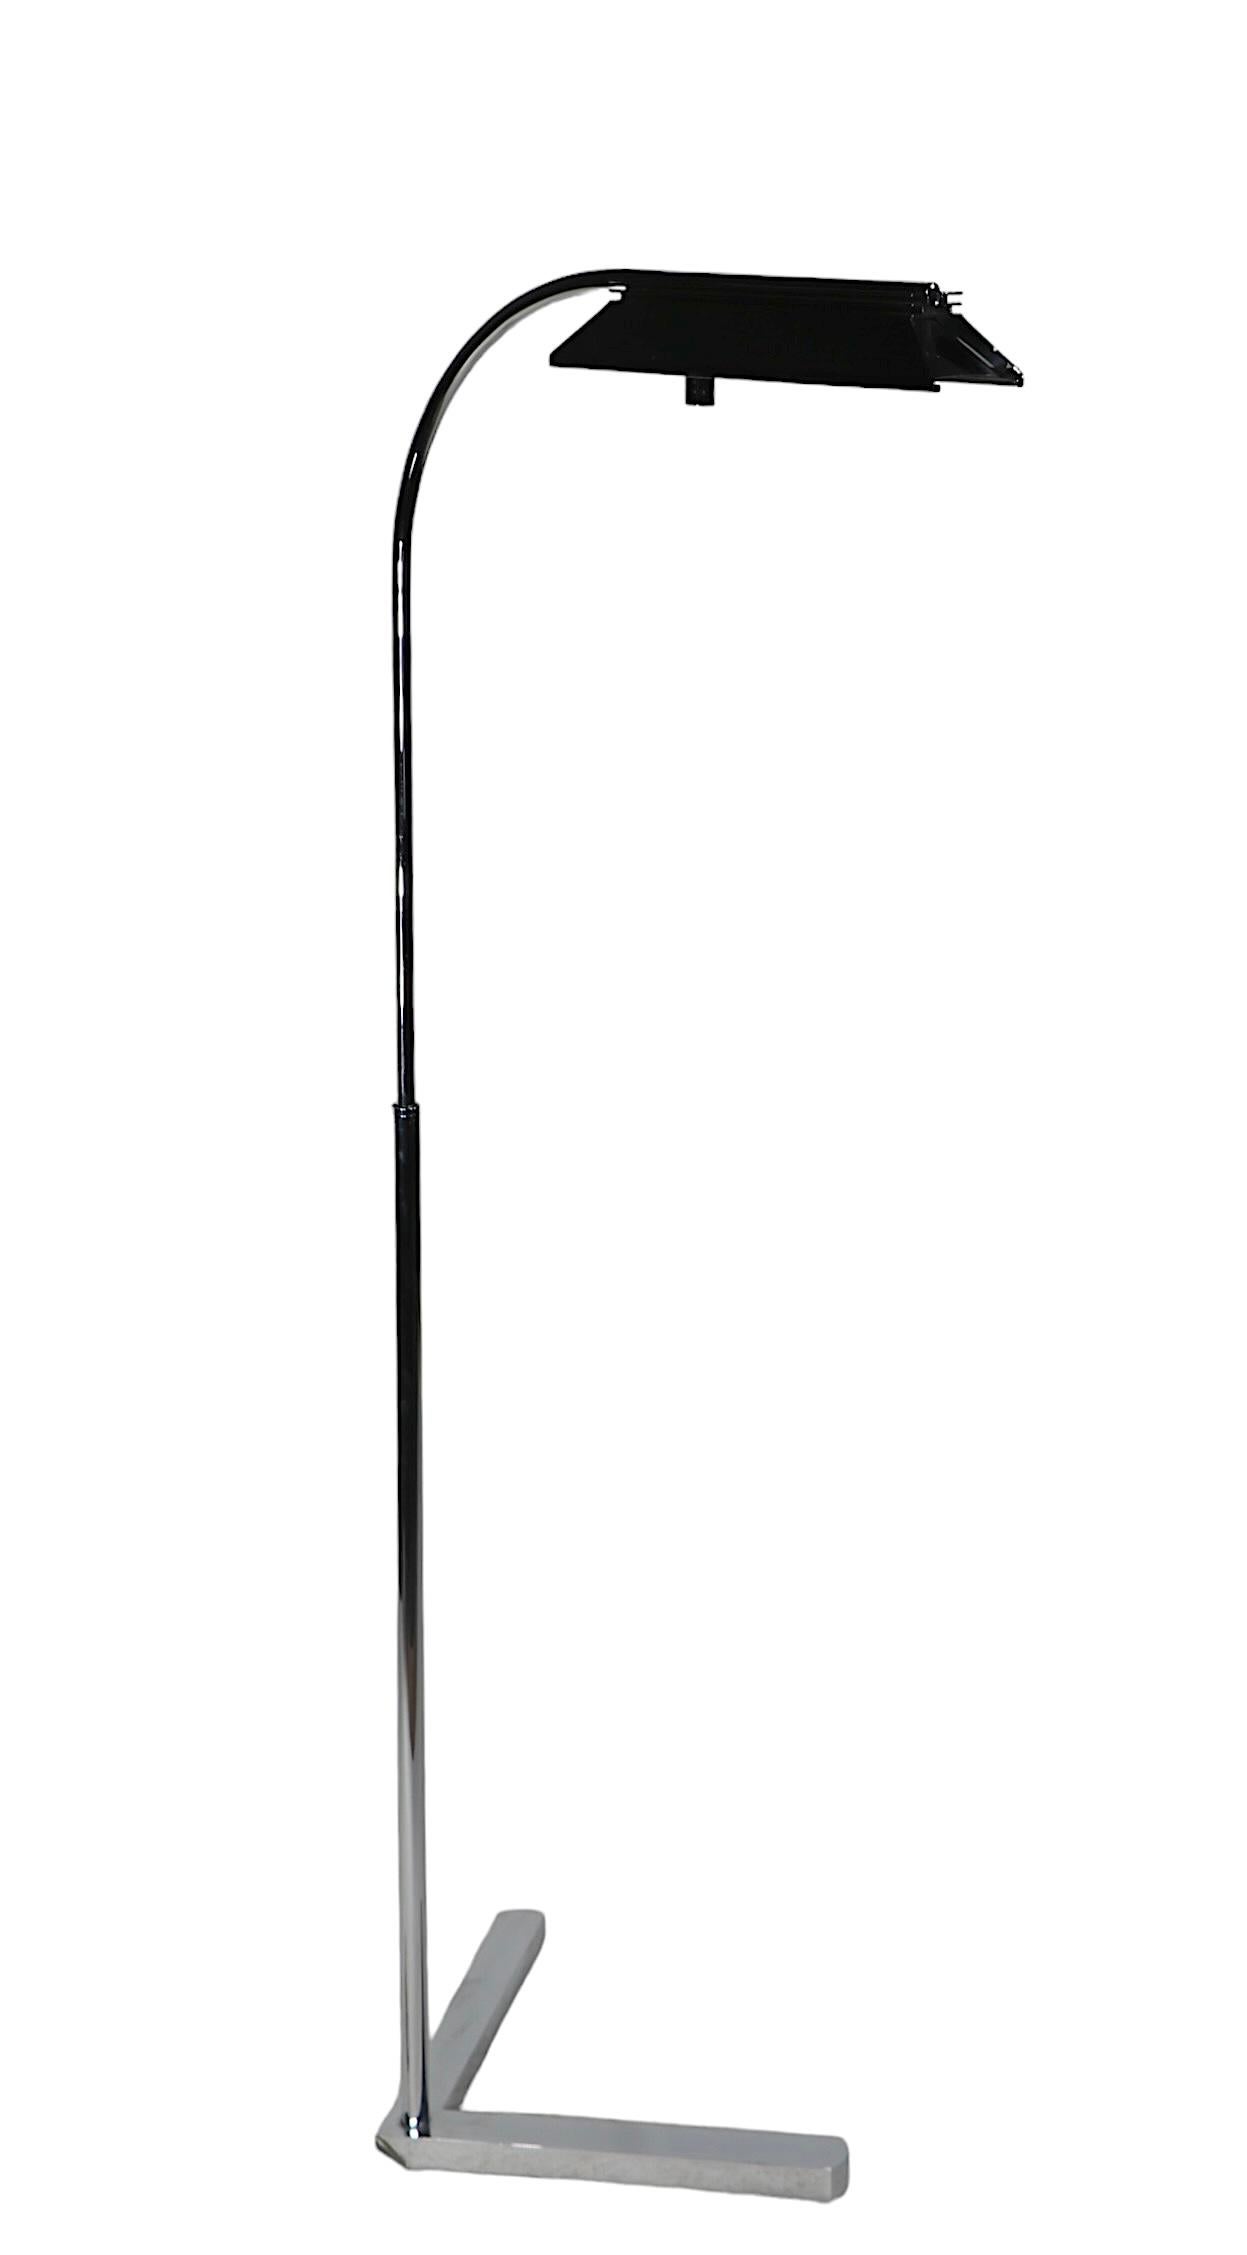 Bright Chrome Adjustable Floor Reading Pharmacy Style Lamp by Casella C 1980's For Sale 3